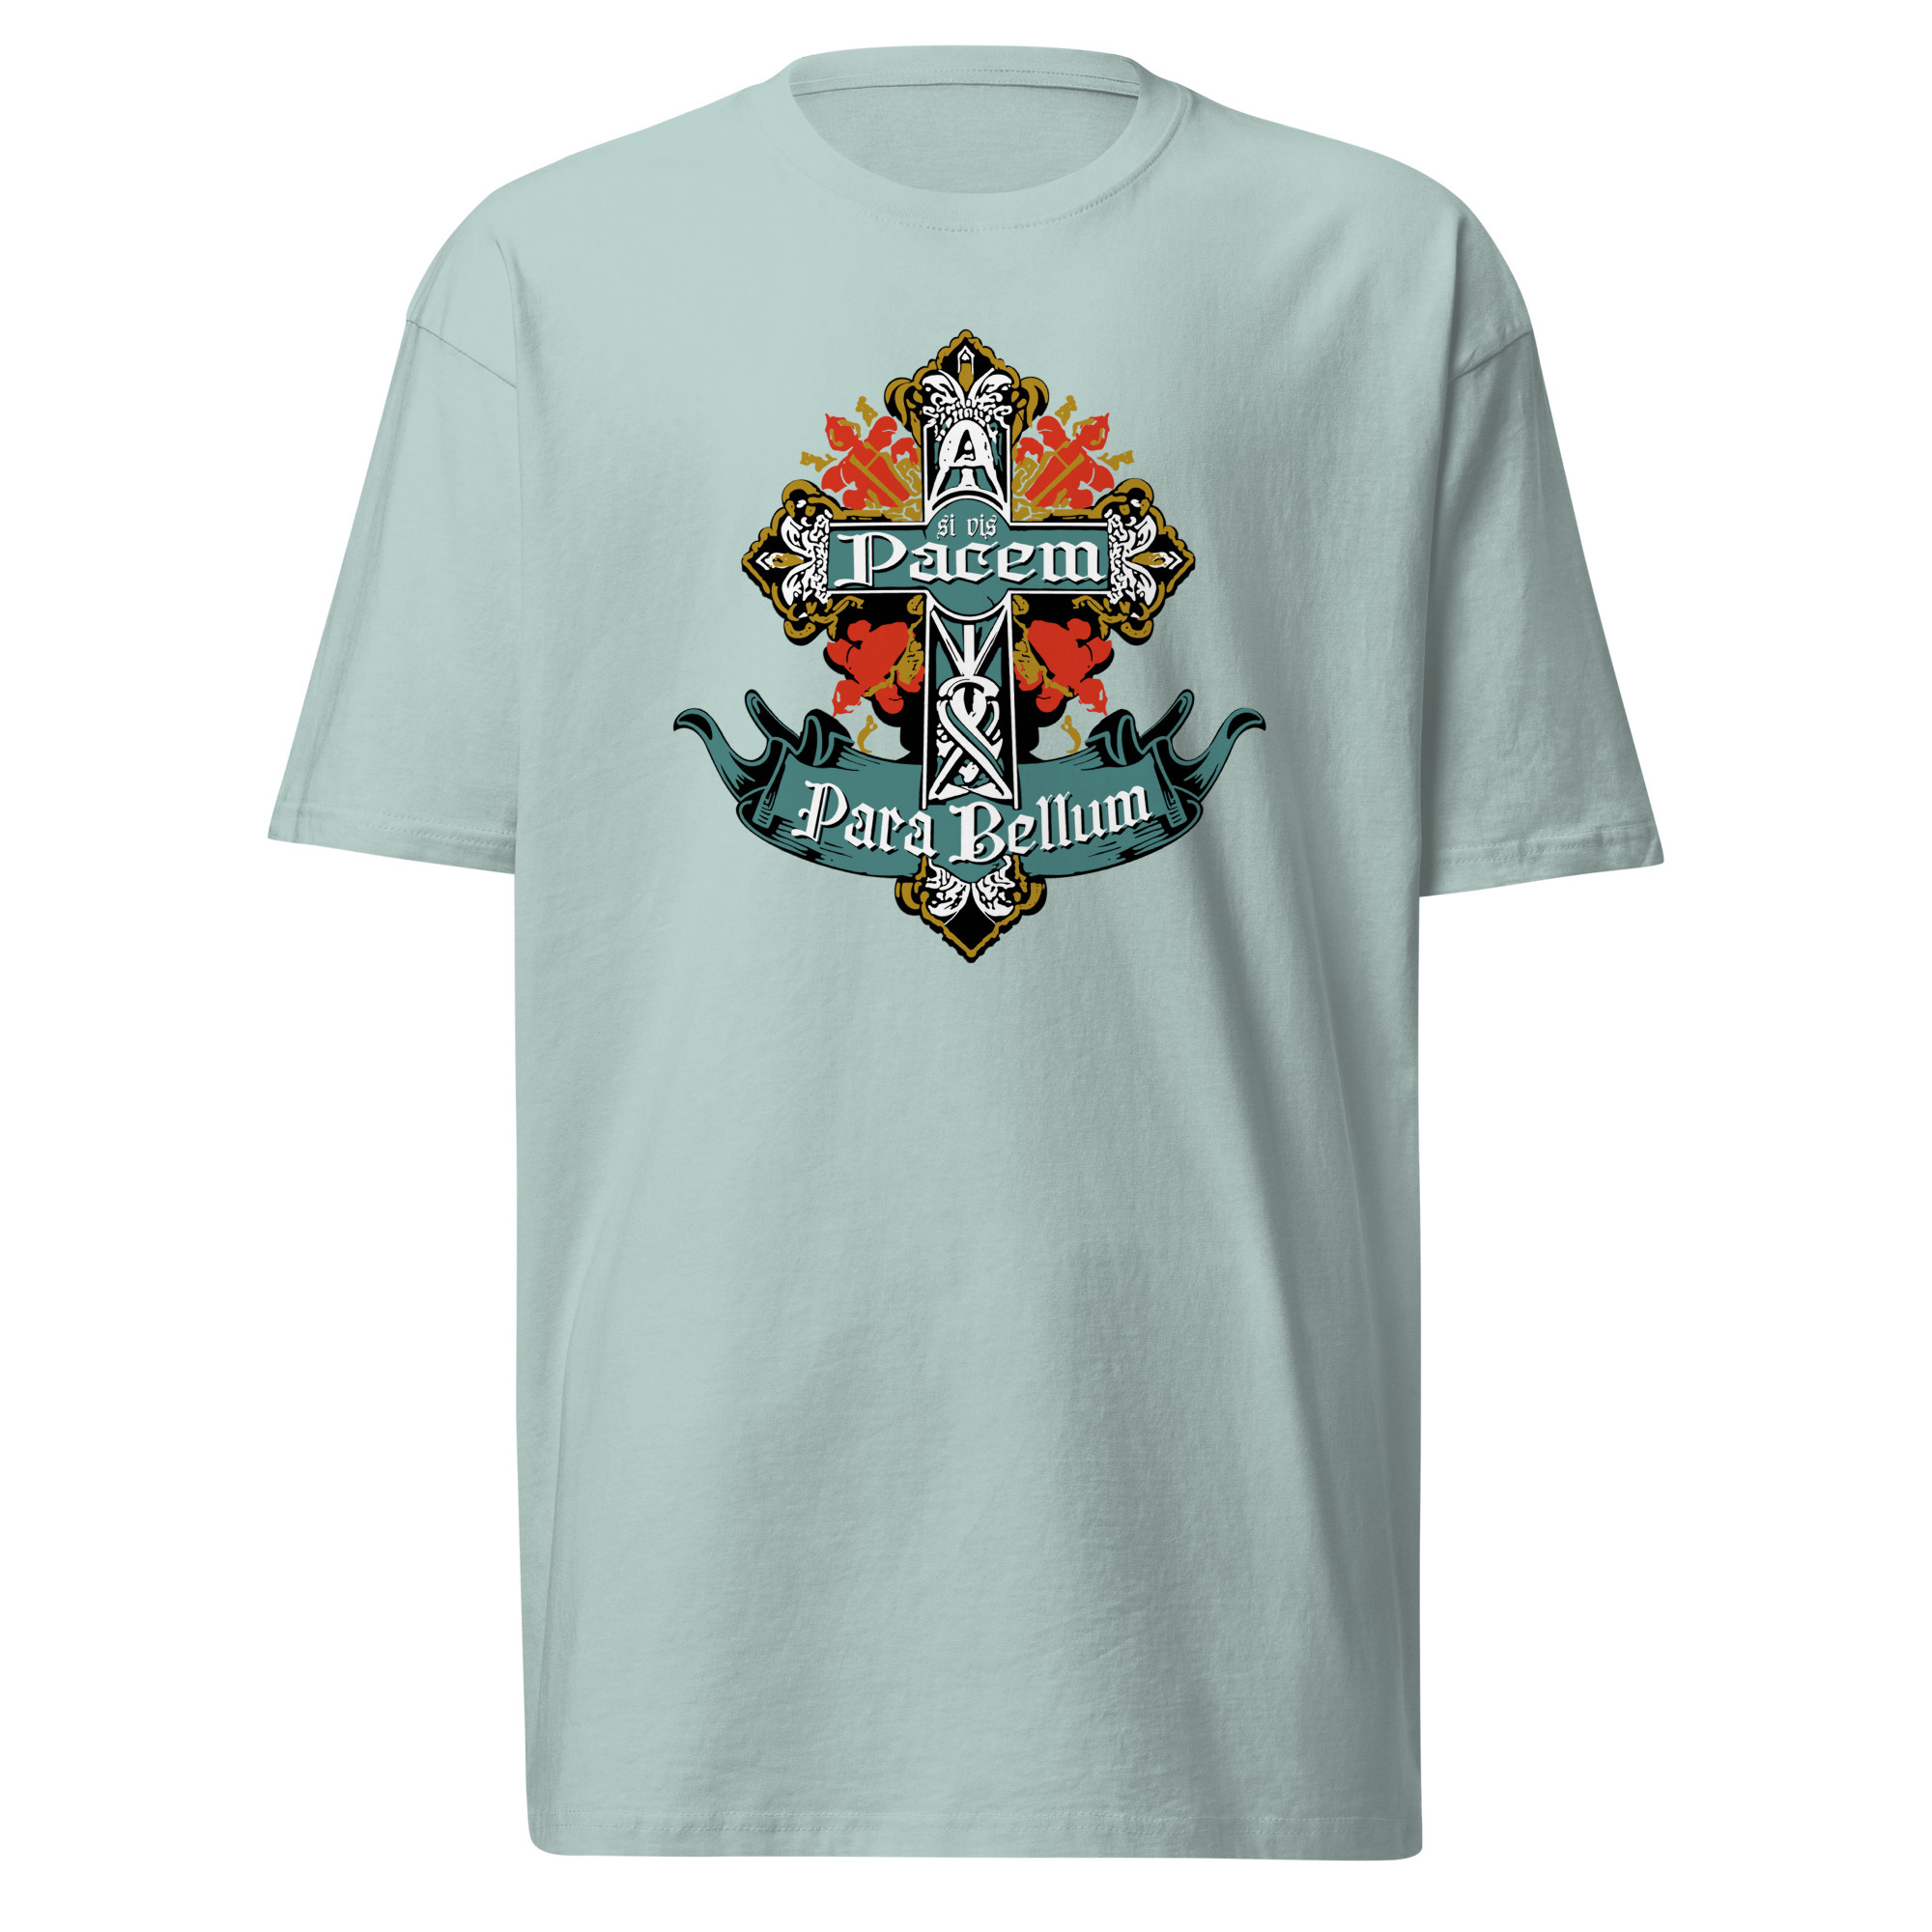 If You Want Peace, Prepare For War T-Shirt - Agave / S